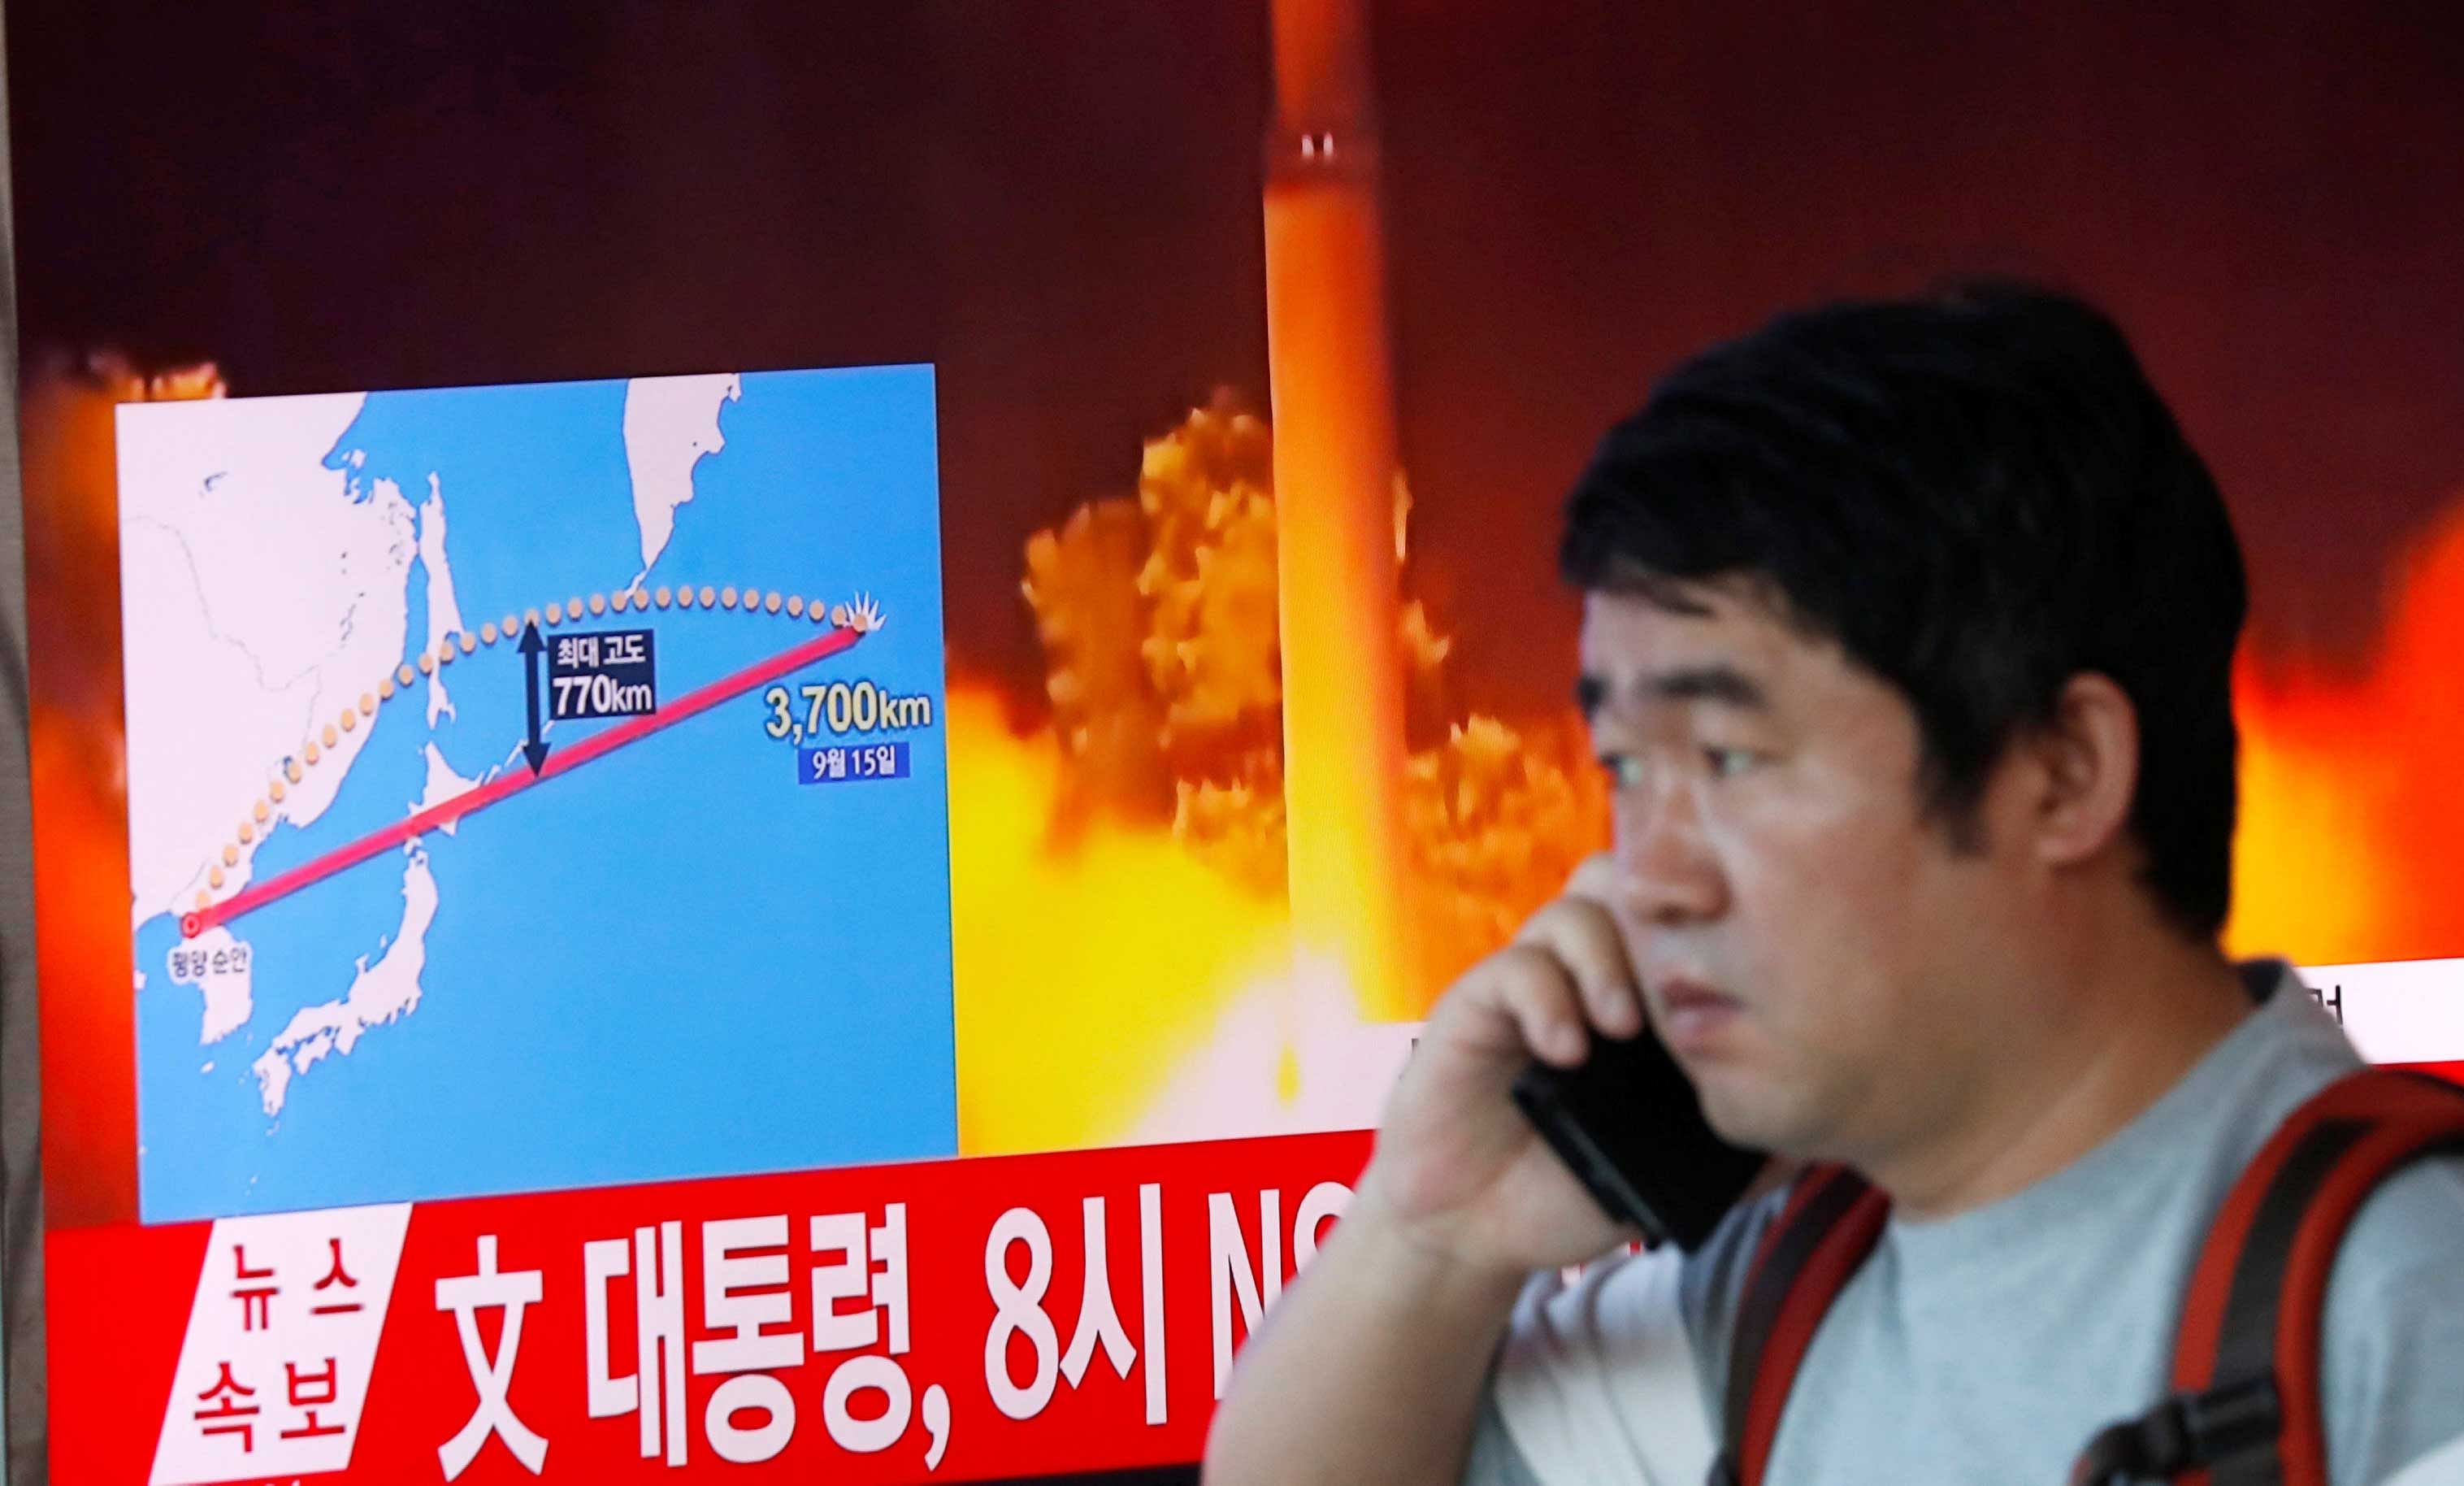 A man watches a television broadcasting a news report on North Korea firing a missile that flew over Japan's northern Hokkaido far out into the Pacific Ocean, in Seoul. Reuters photo